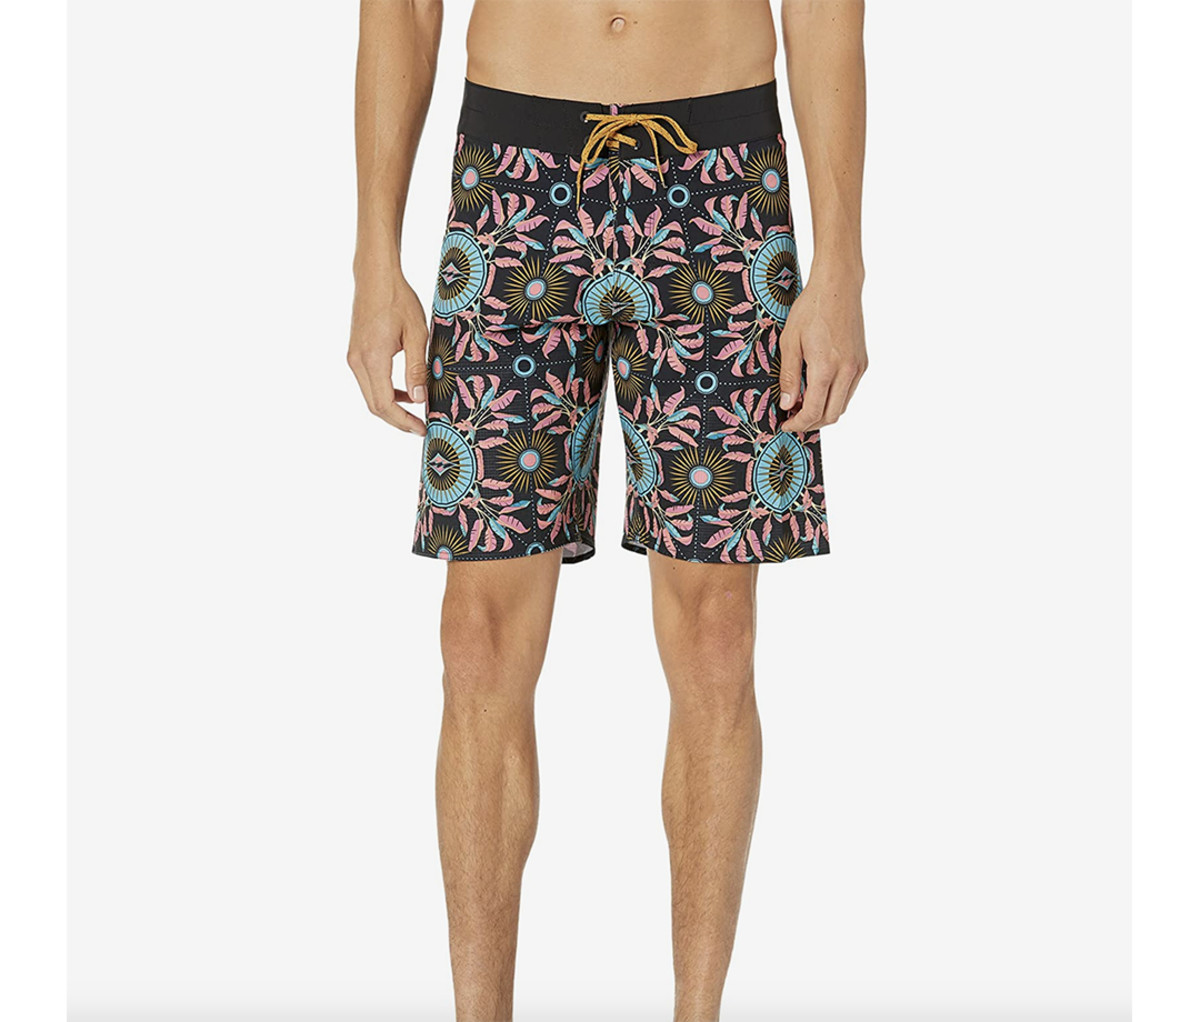 Get These Billabong Sundays Airlite Boardshorts for Your Trips to the ...